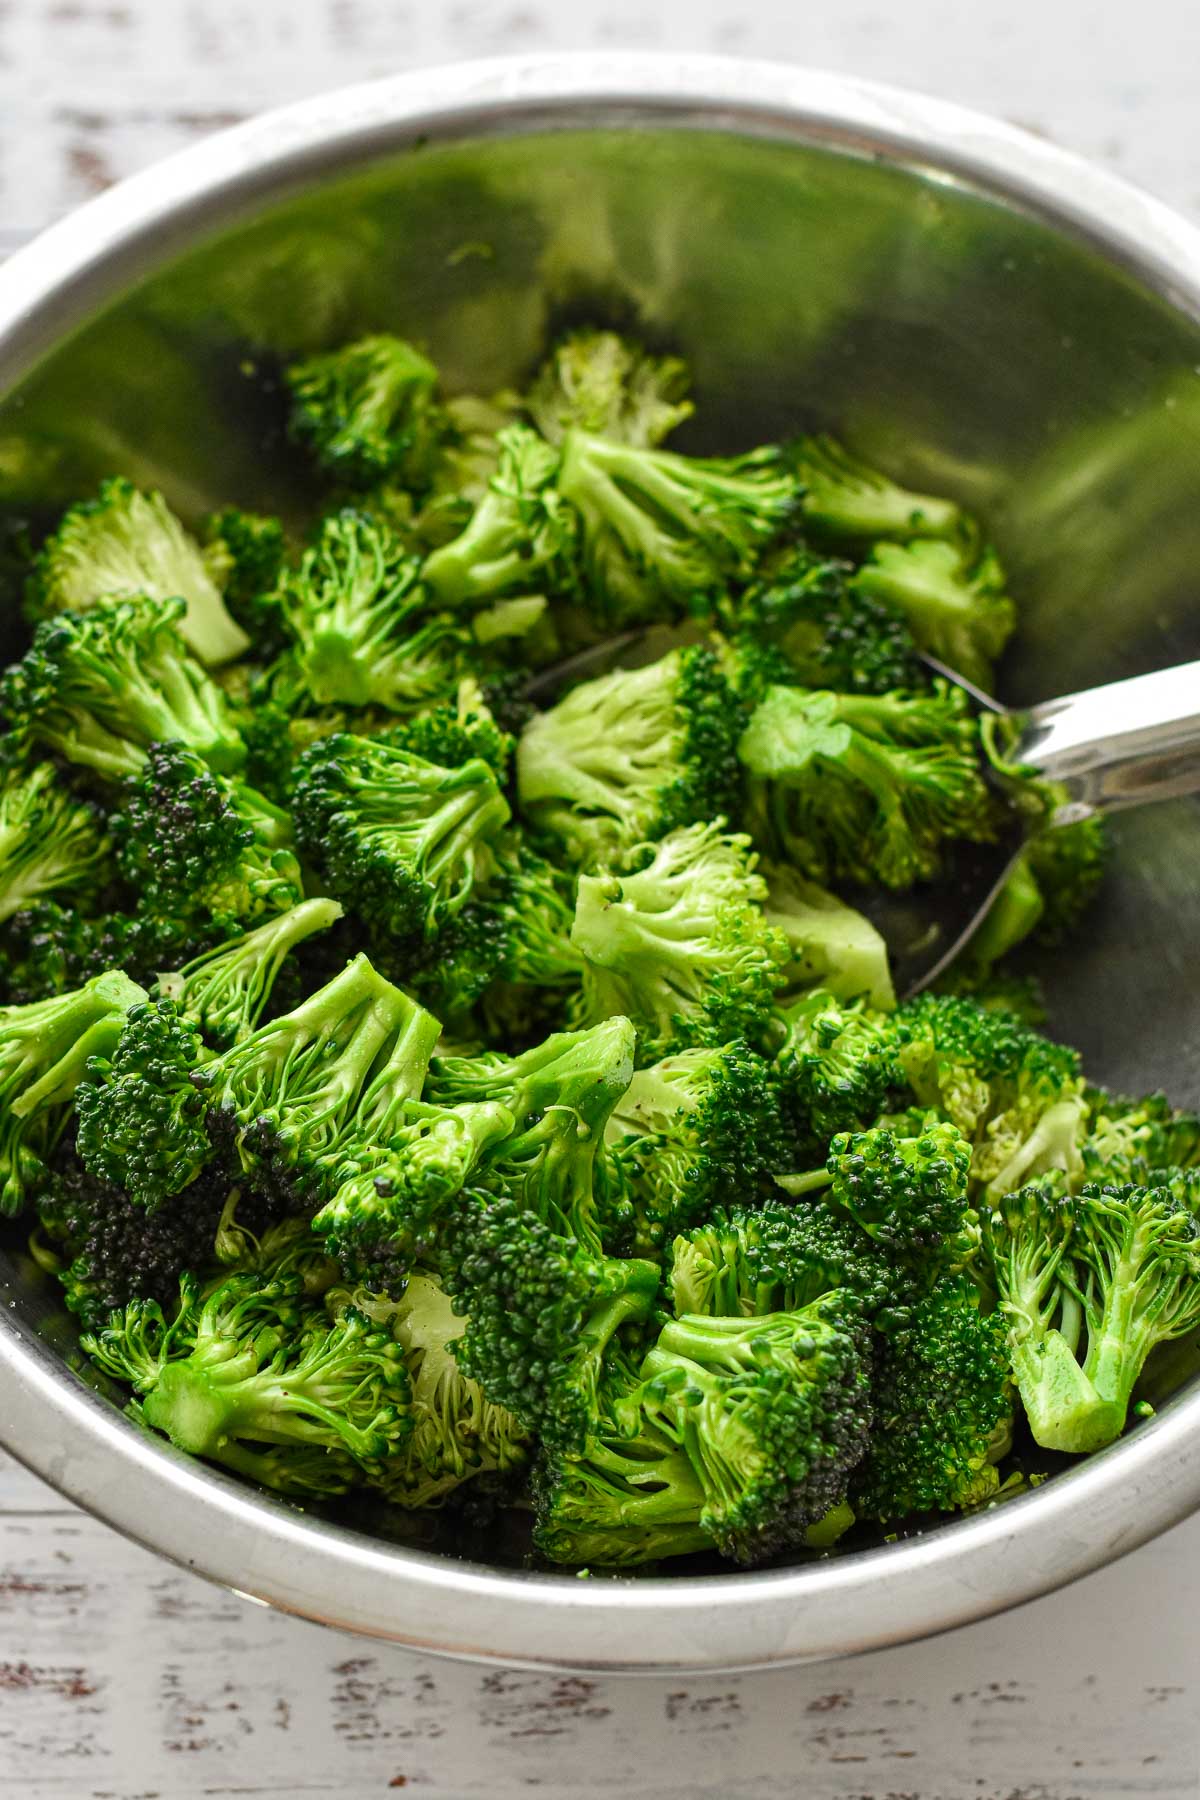 process shot of broccoli in a stainless steel bowl after tossing with a spoon to coat in oil mixture